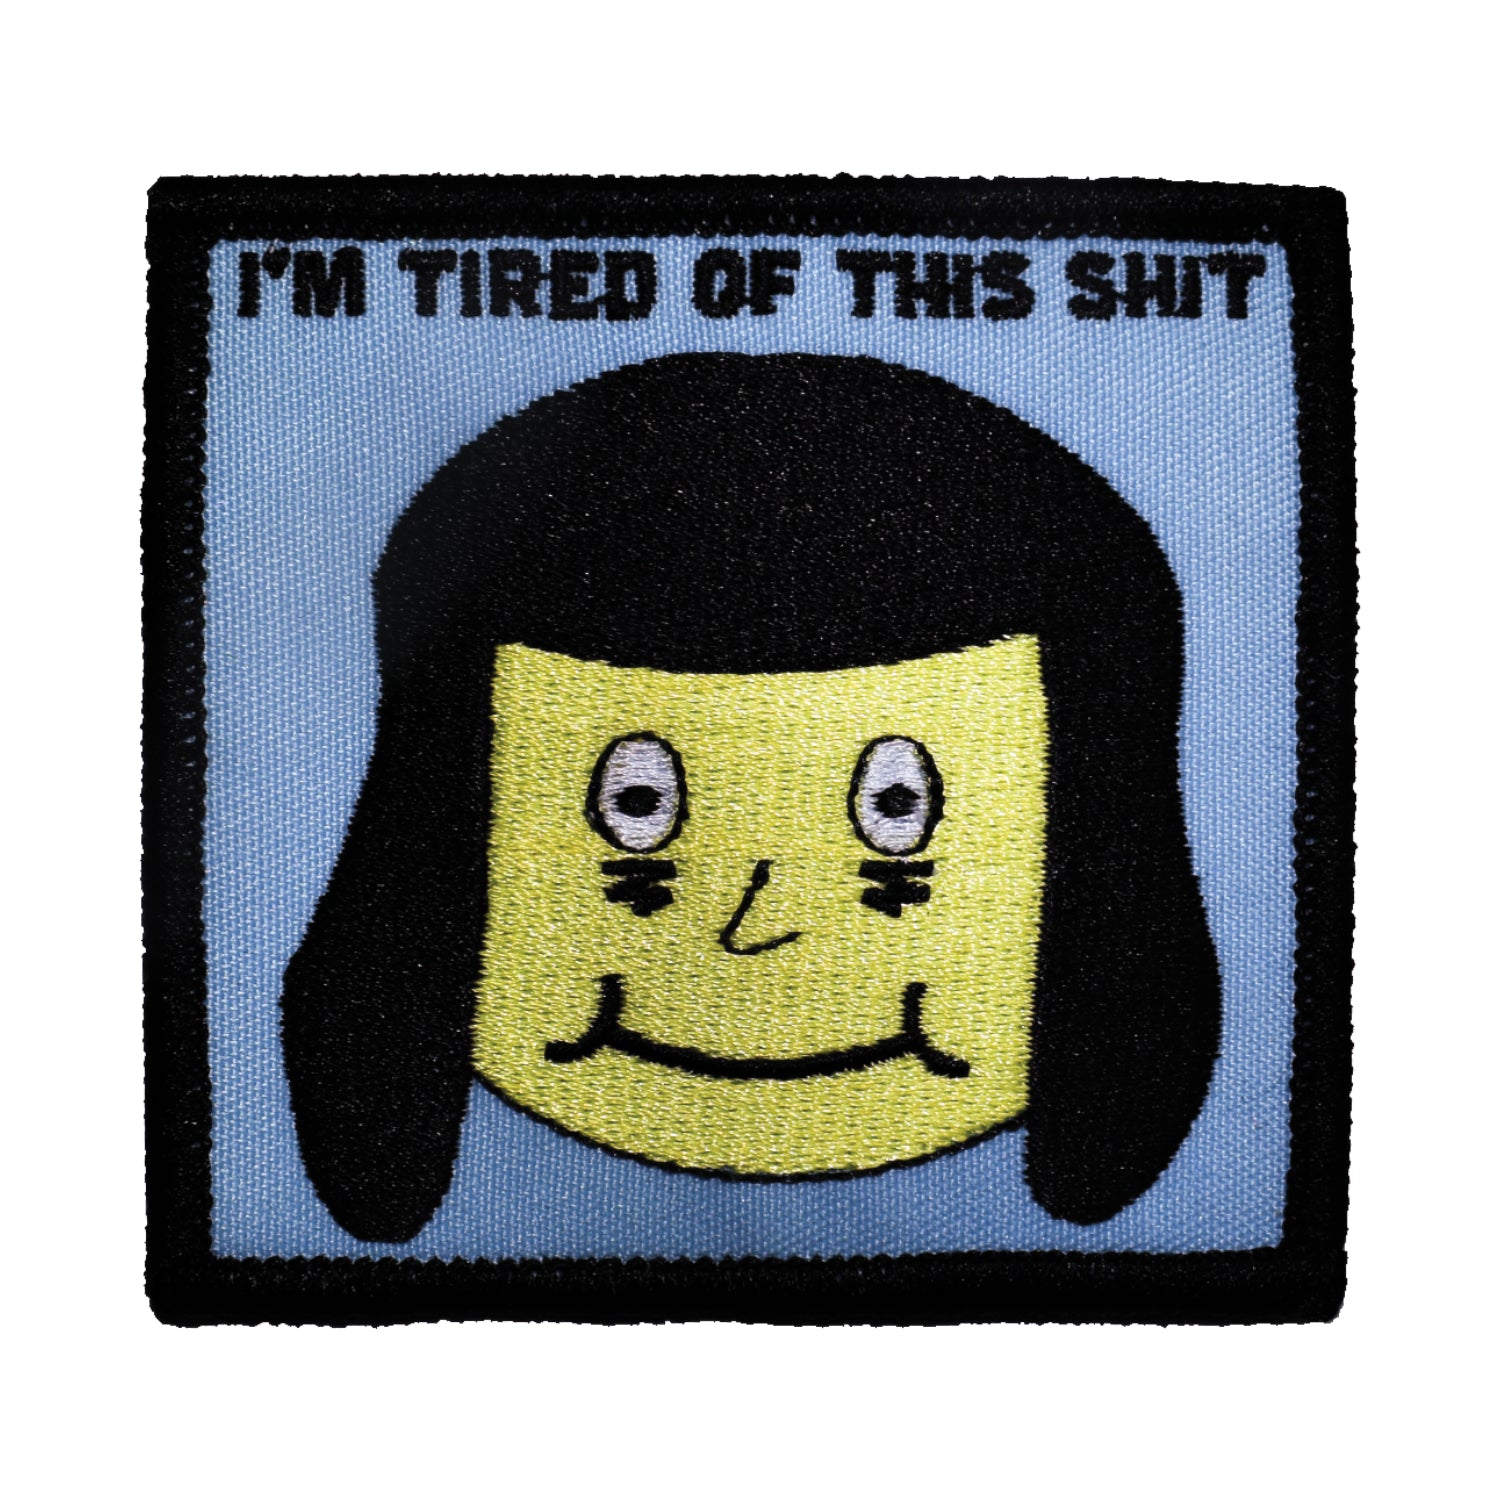 A square cotton twill embroidered patch with a face of a person with exaggerated bags under their eyes and a nervous smile with the caption “I’M TIRED OF THIS SHIT” written in black above their heac